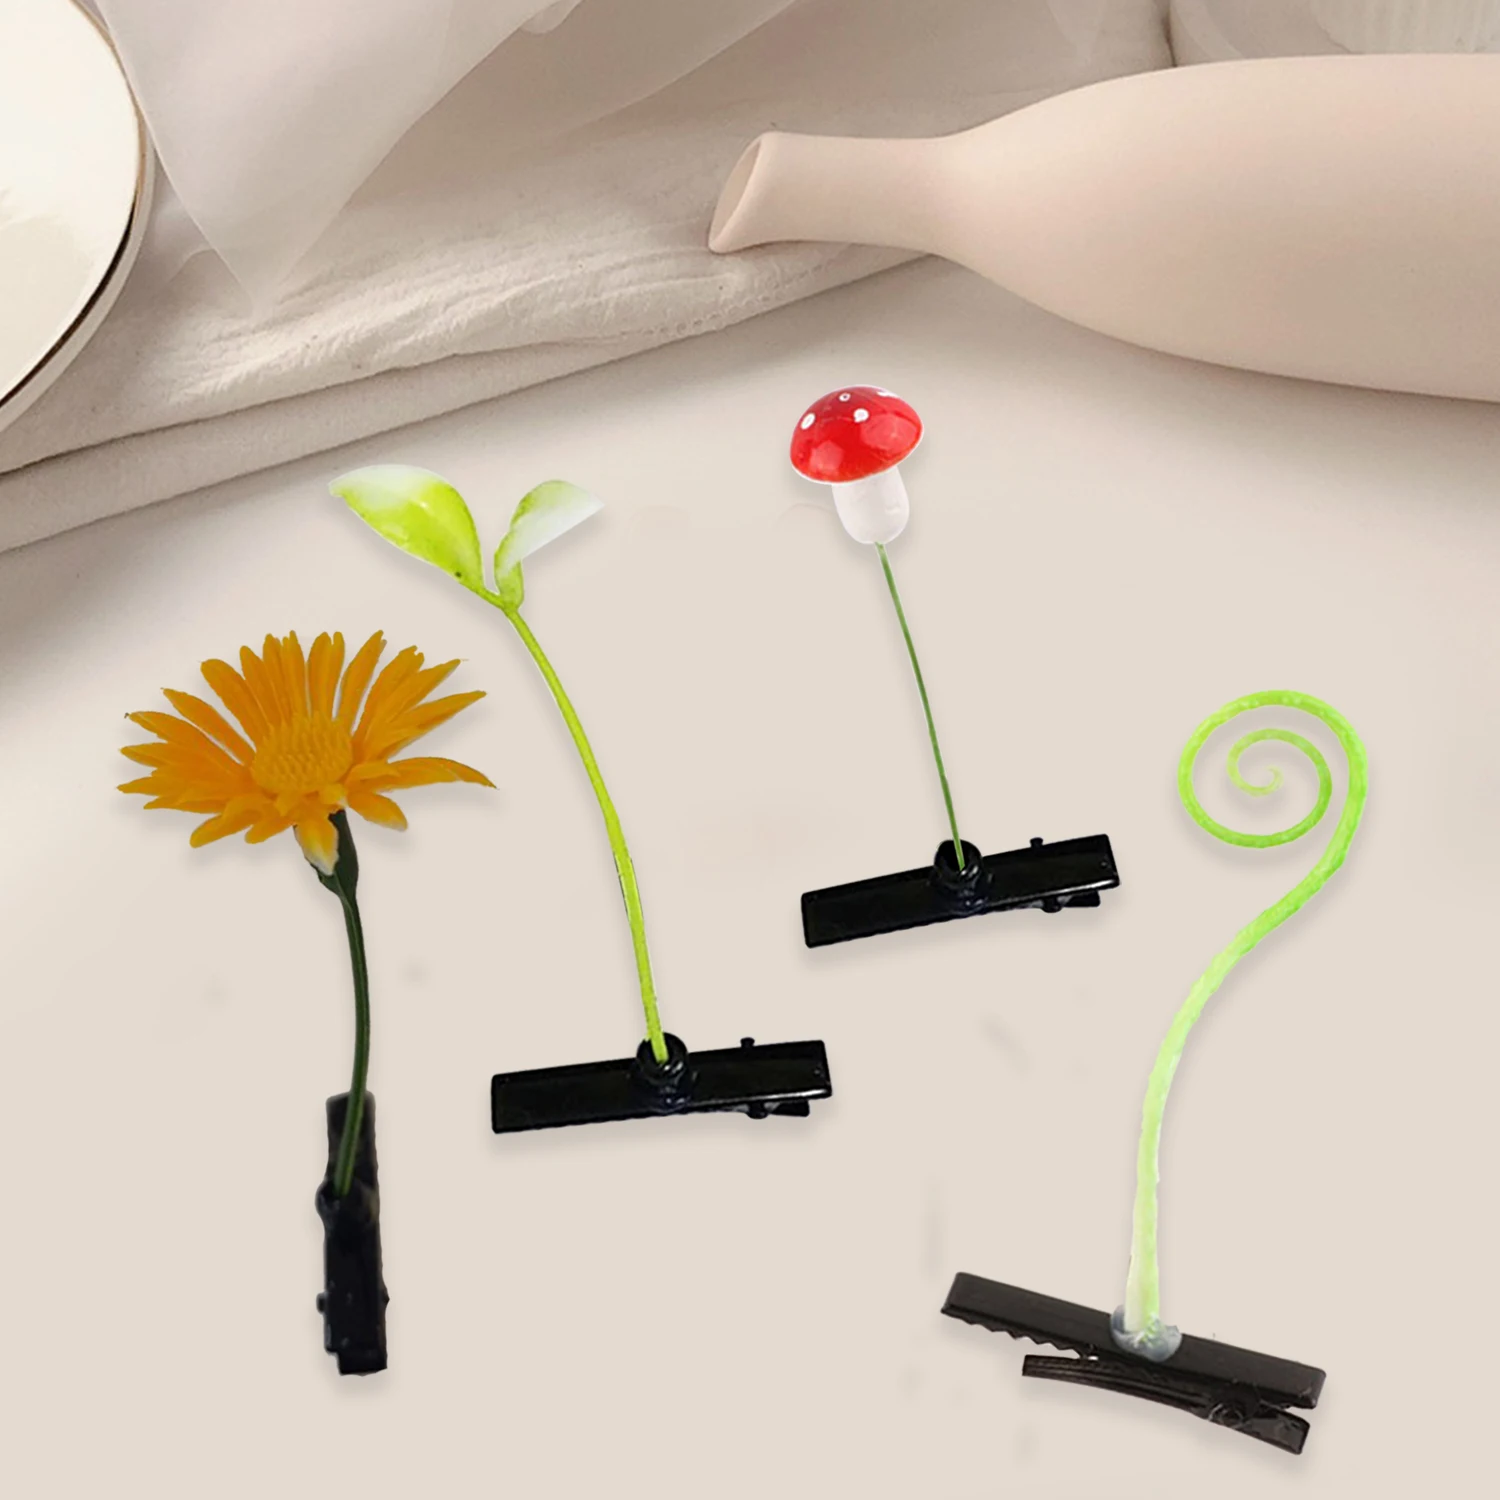 

4pcs/set Funny Bean Sprout Bobby Hairpins Sweet Girls Plant Grass Sunflower Hair Clips Party Hair Decorations For Women Headwear